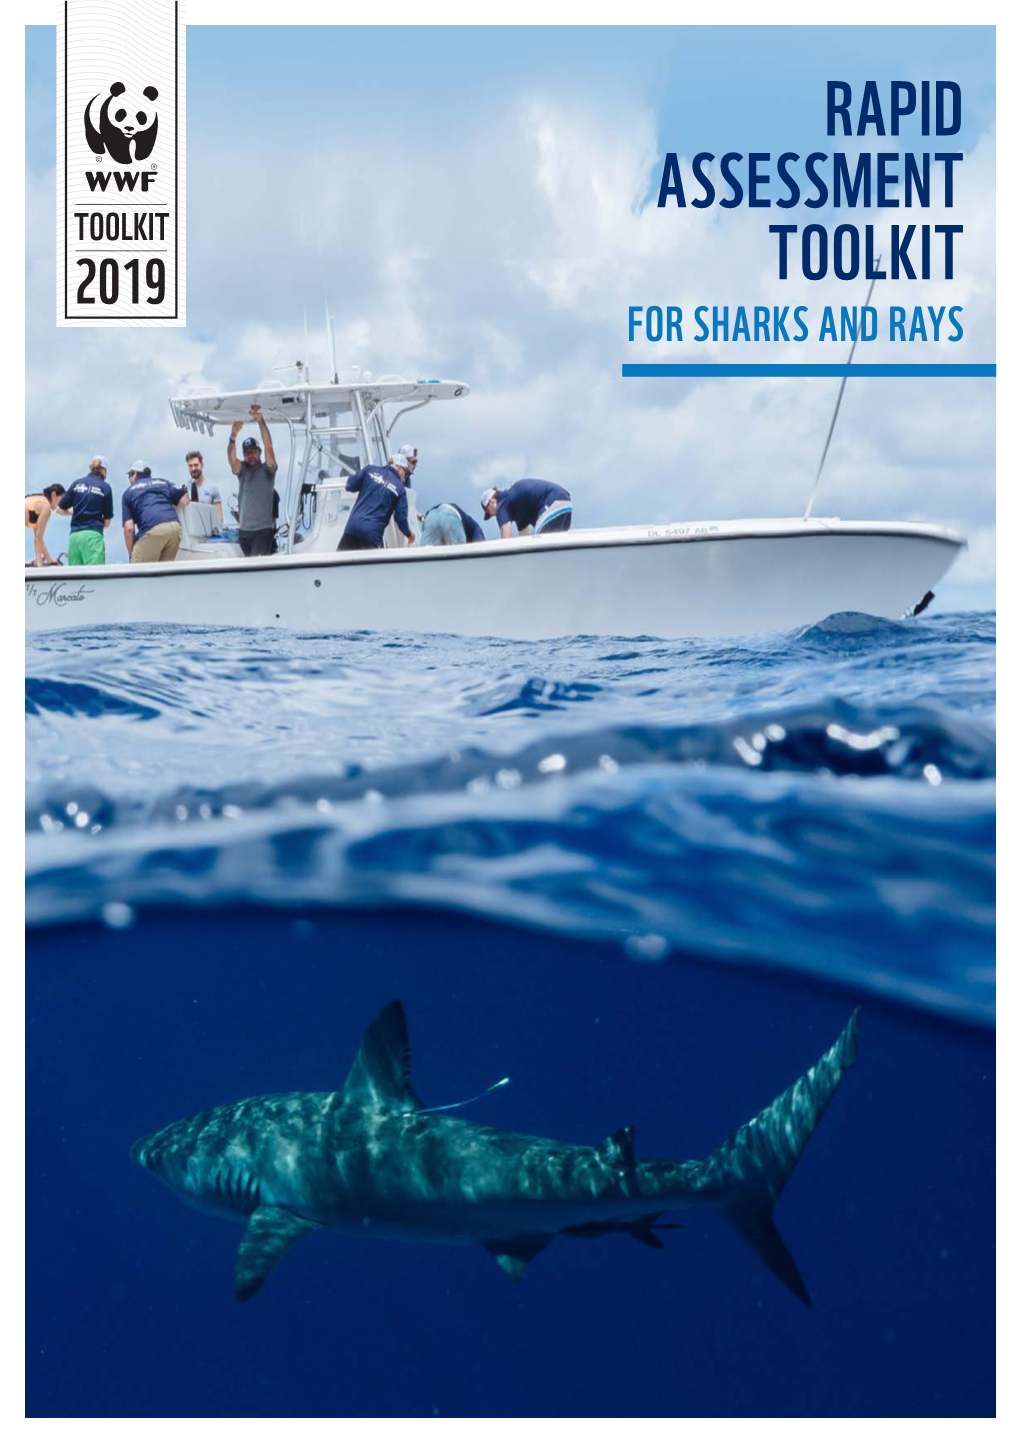 Rapid Assessment Toolkit 2019 Toolkit for Sharks and Rays Contents